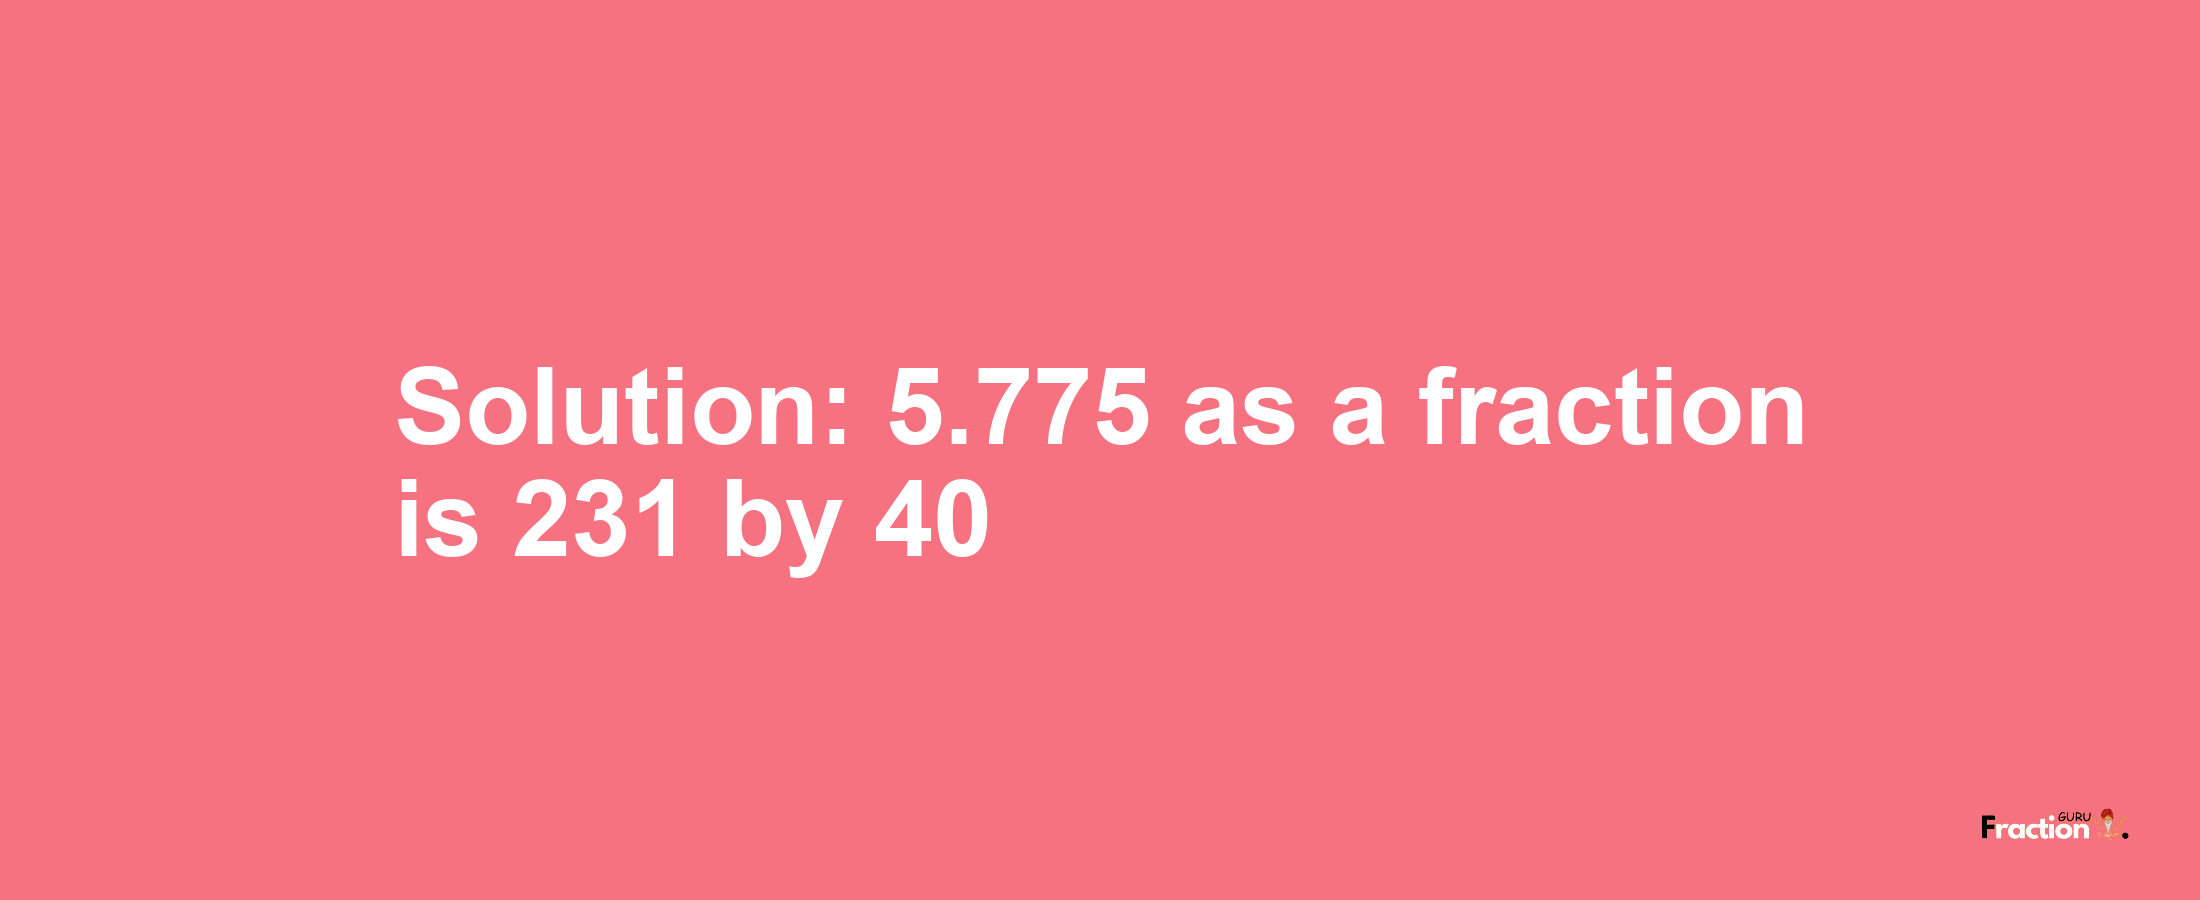 Solution:5.775 as a fraction is 231/40